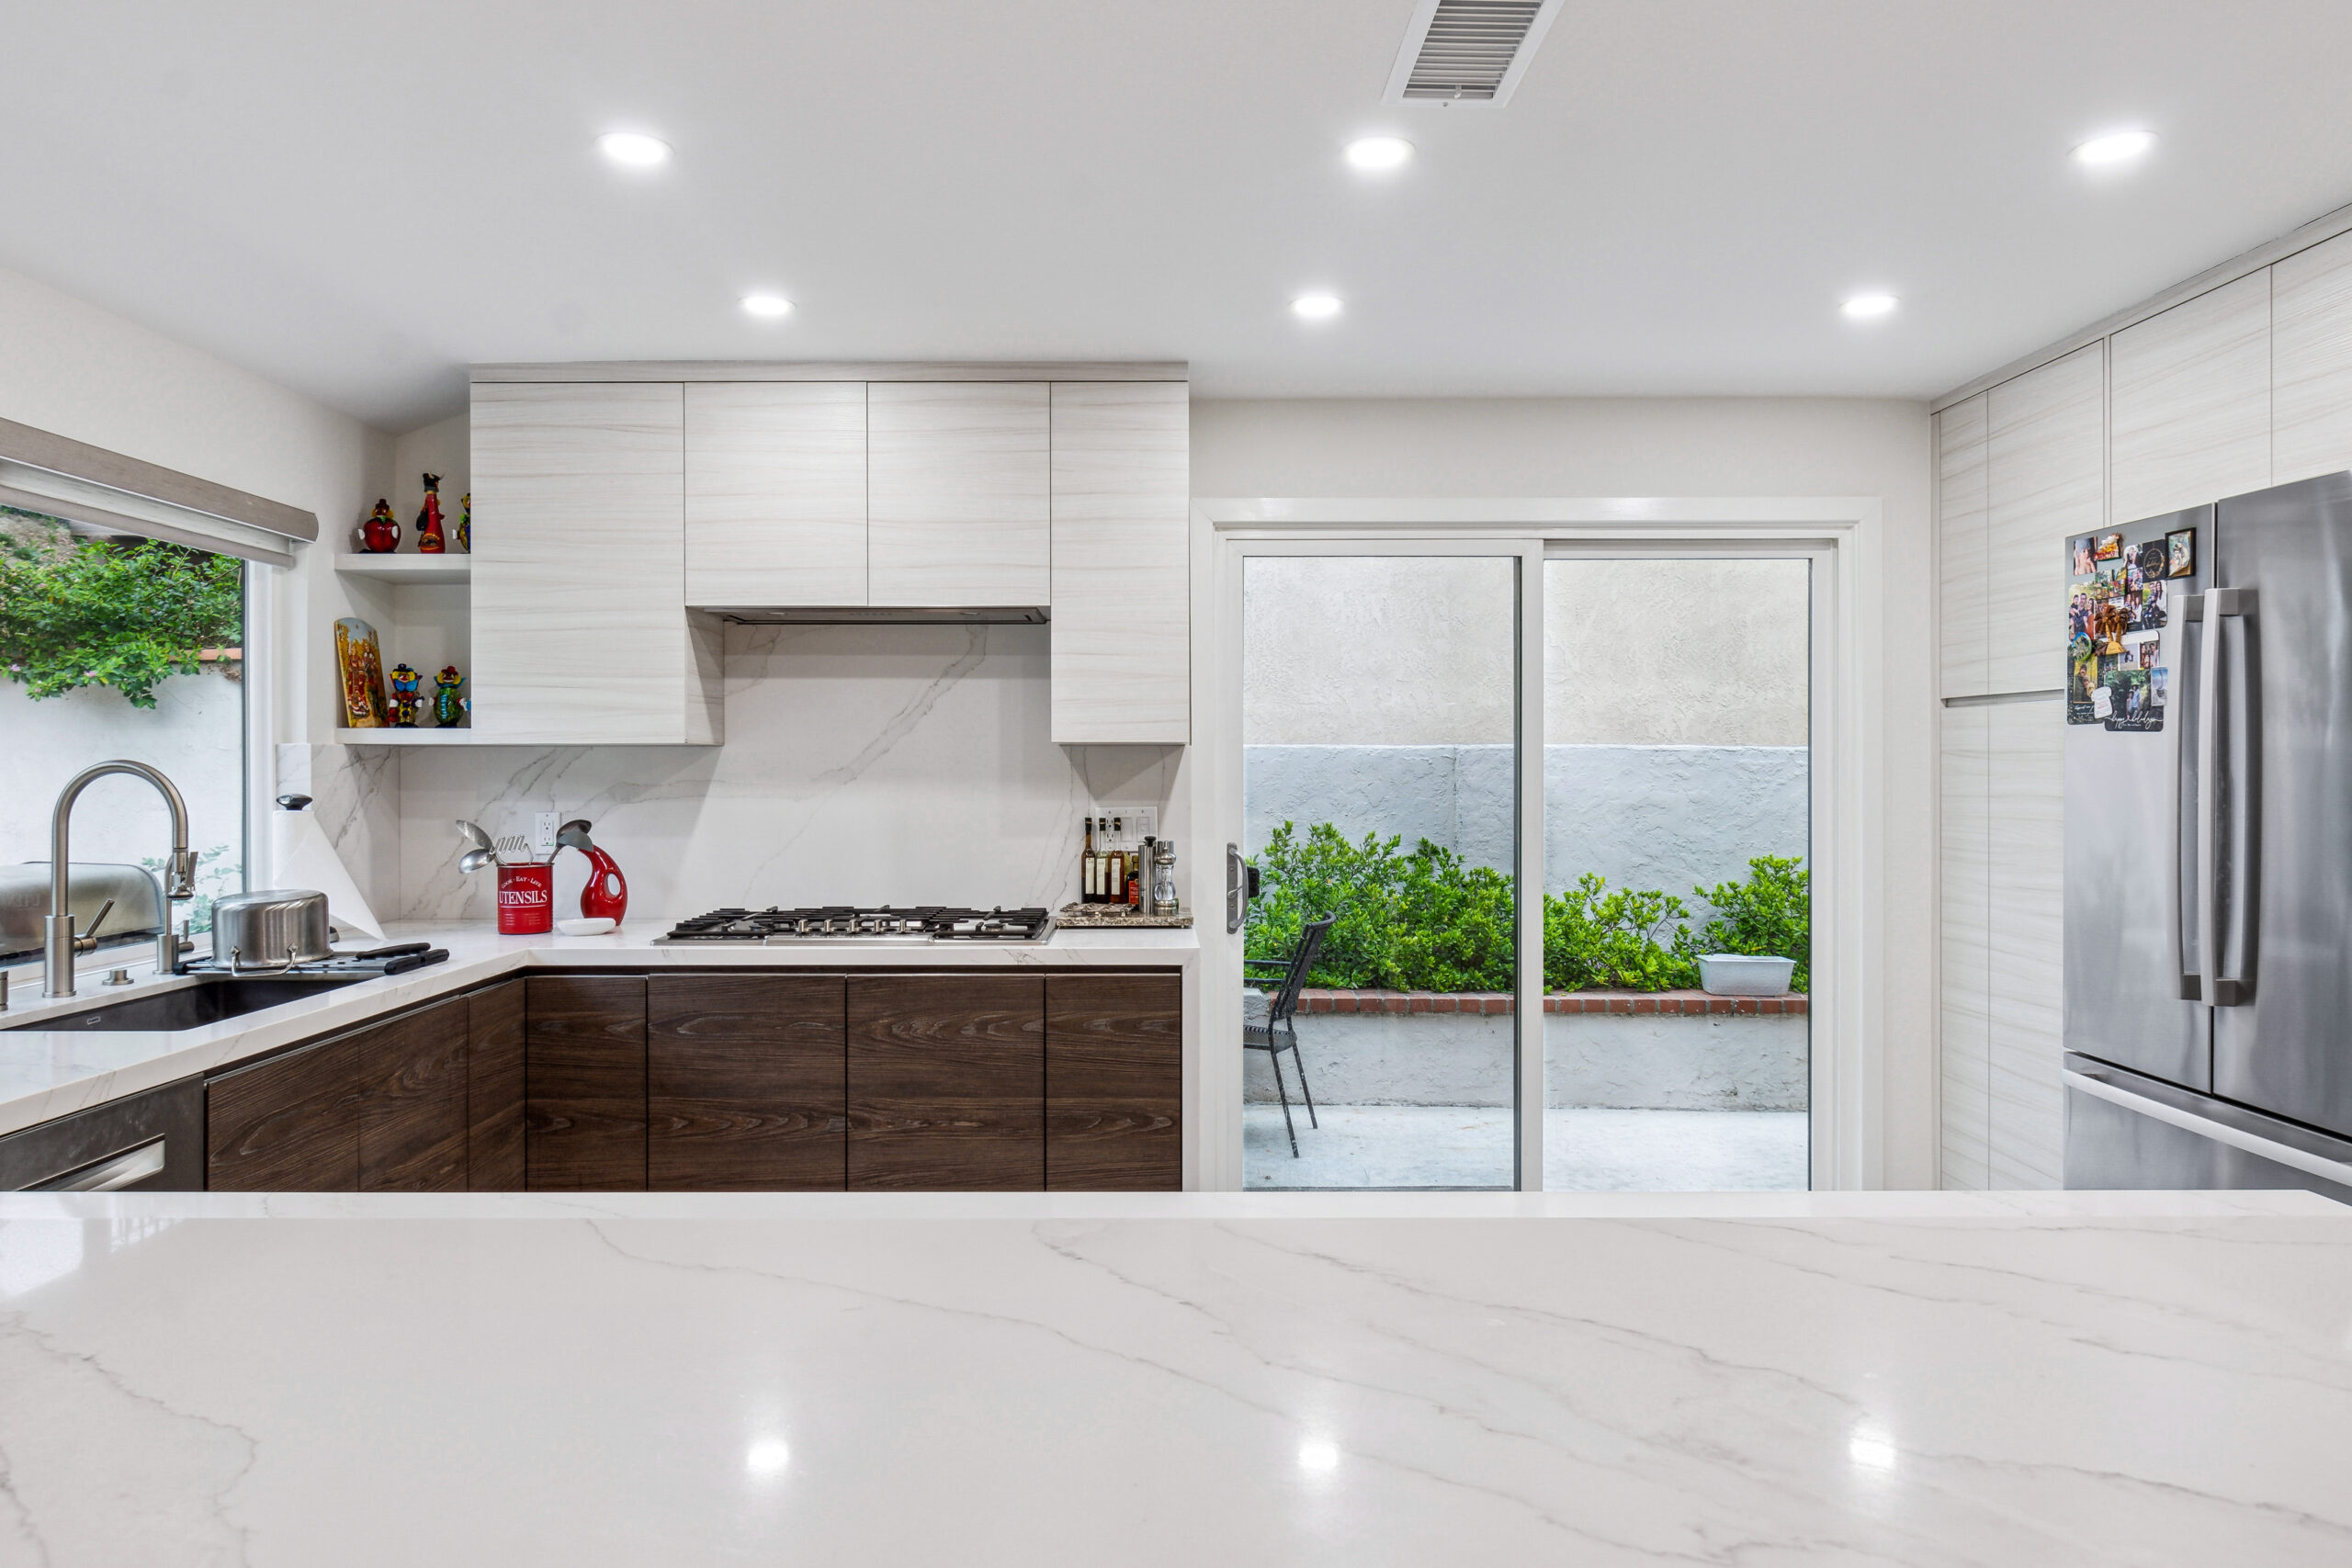 This kitchen features a white quartz countertop and white and dark brown cabinets.